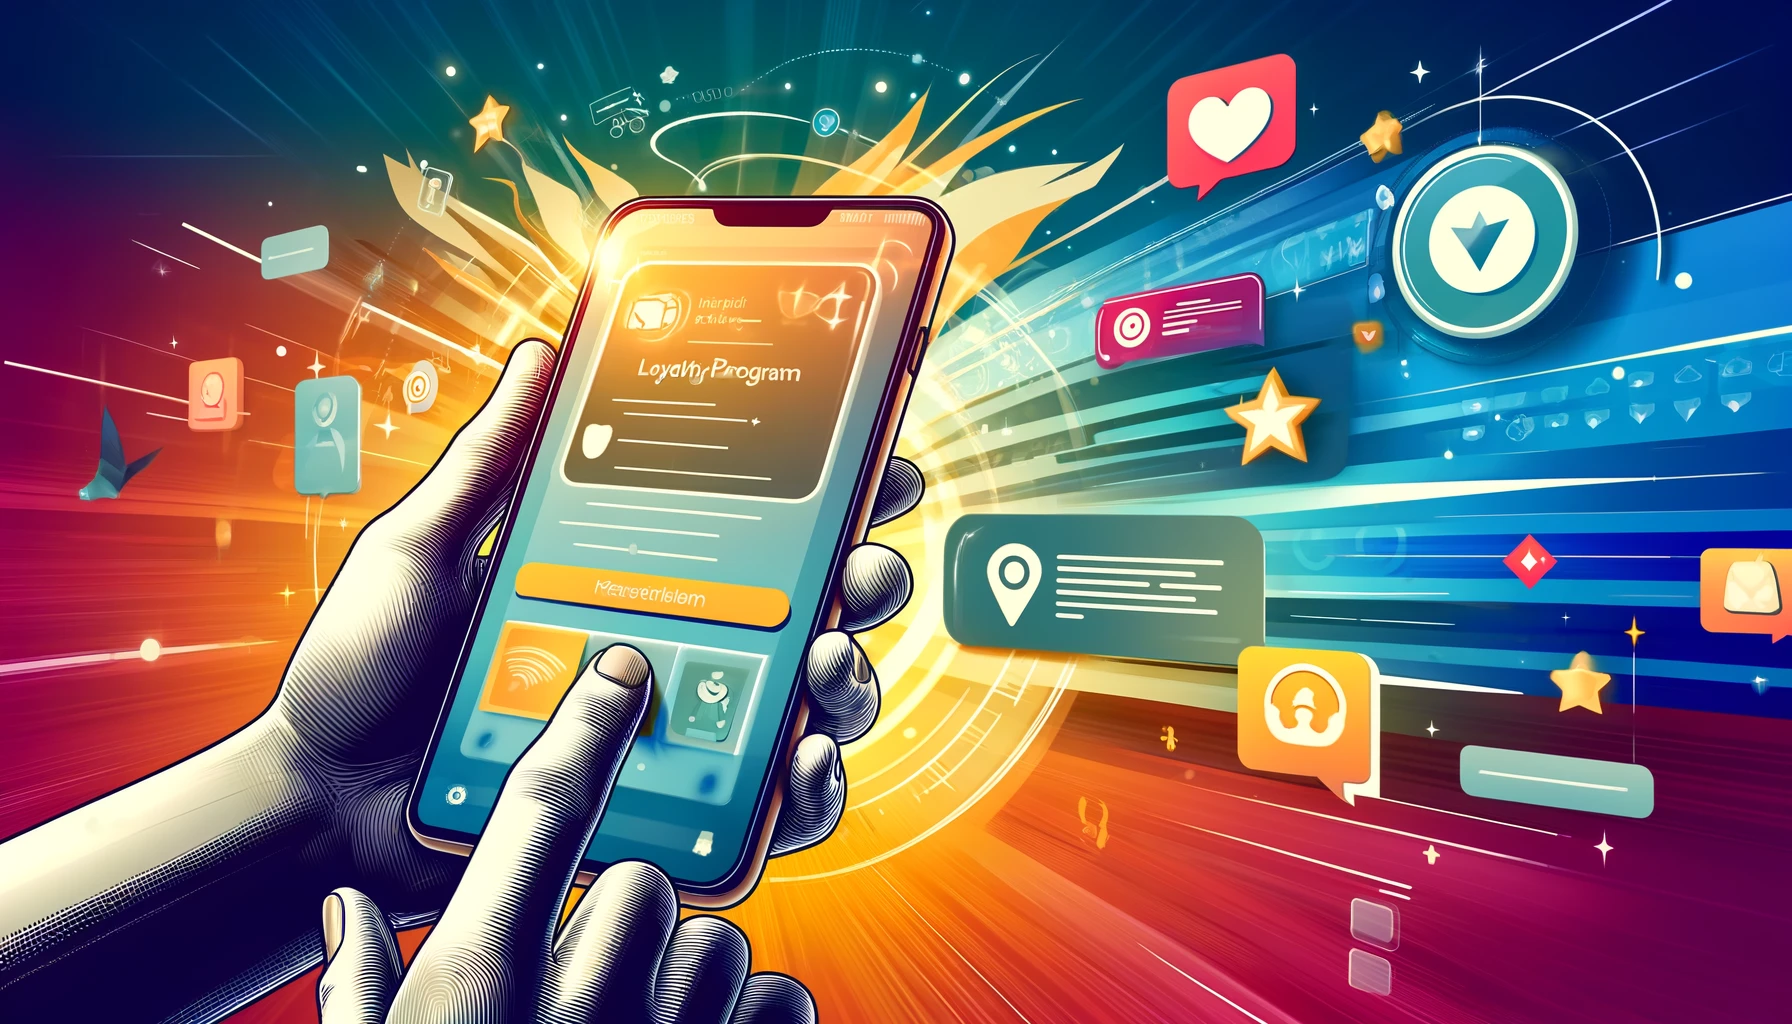 An artistic illustration showing a person using a mobile app on a smartphone. The app displays various features of a digital loyalty program, including notifications for rewards and personalized offers. The background is colorful and abstract, emphasizing connectivity and user engagement with the technology that enhances customer loyalty.